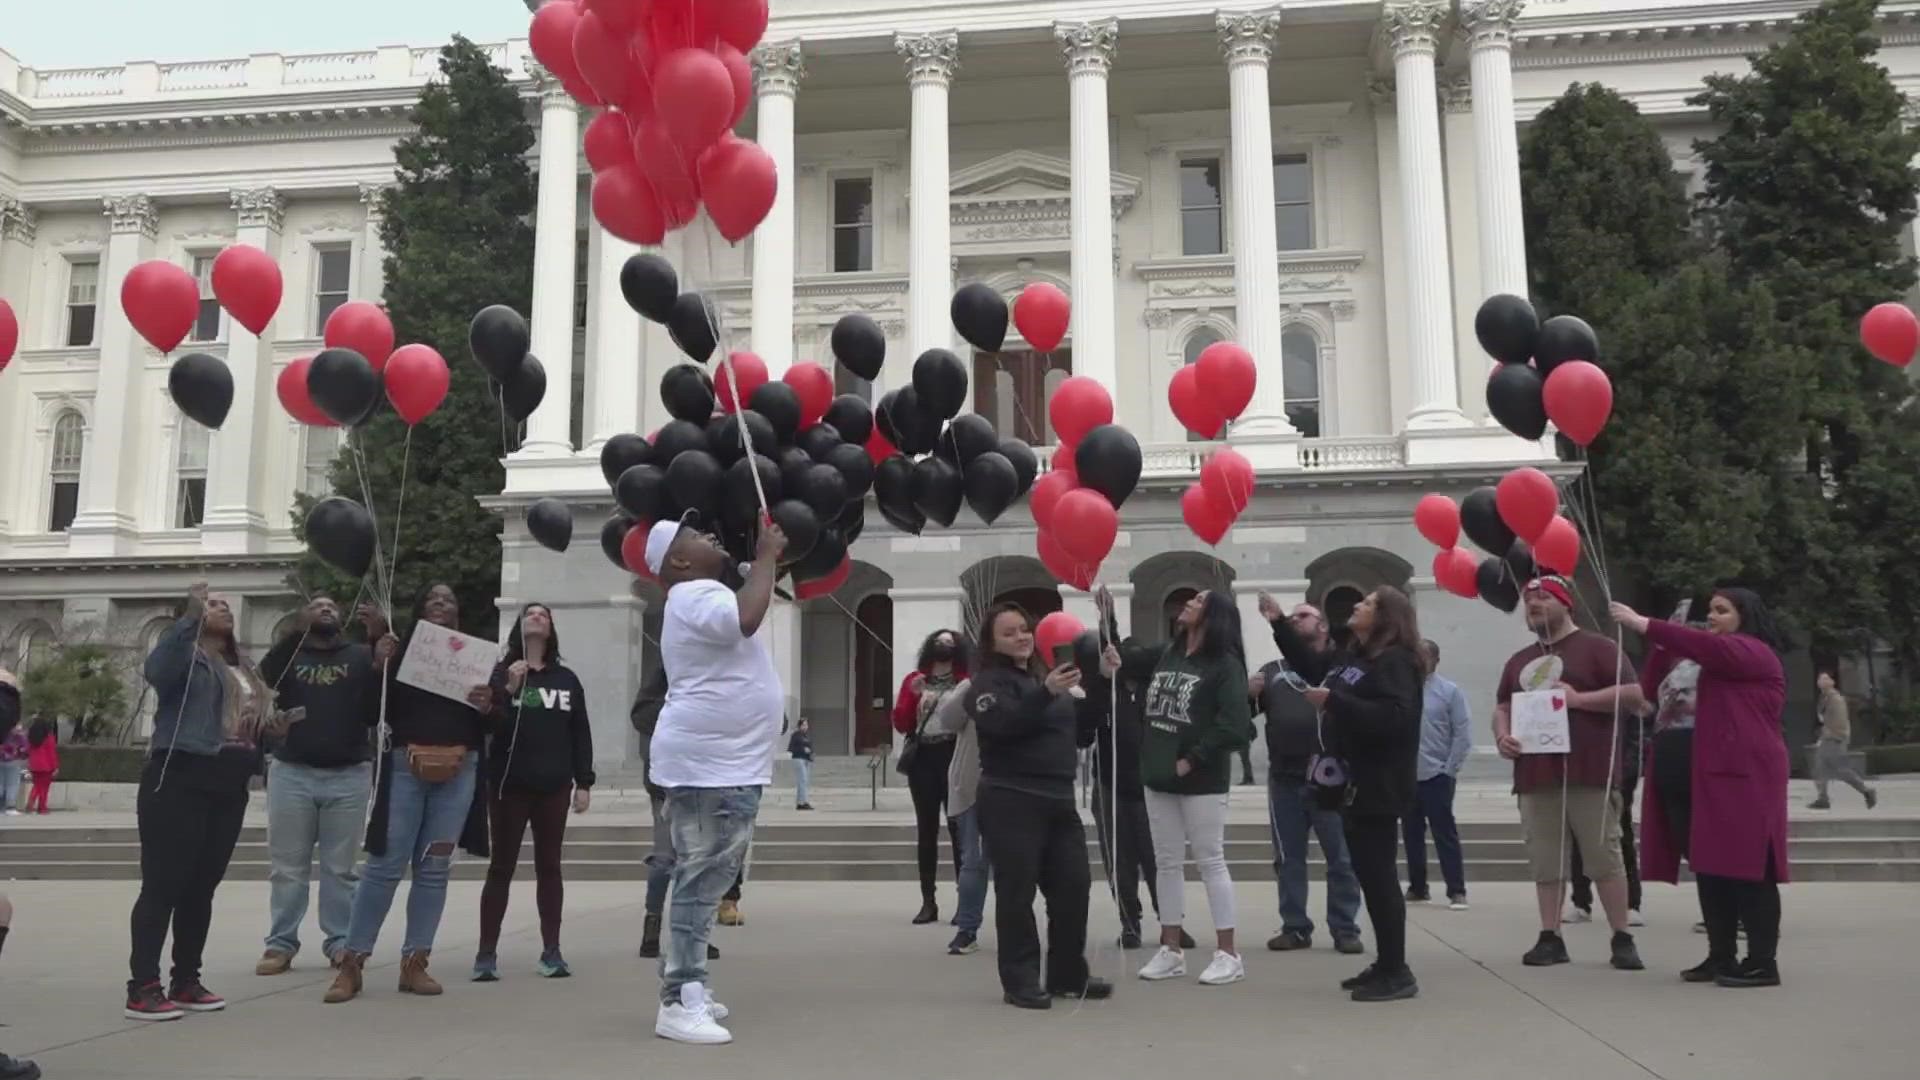 Tyre Nichols' sister and others released balloons in front of the capitol to honor him, Friday.